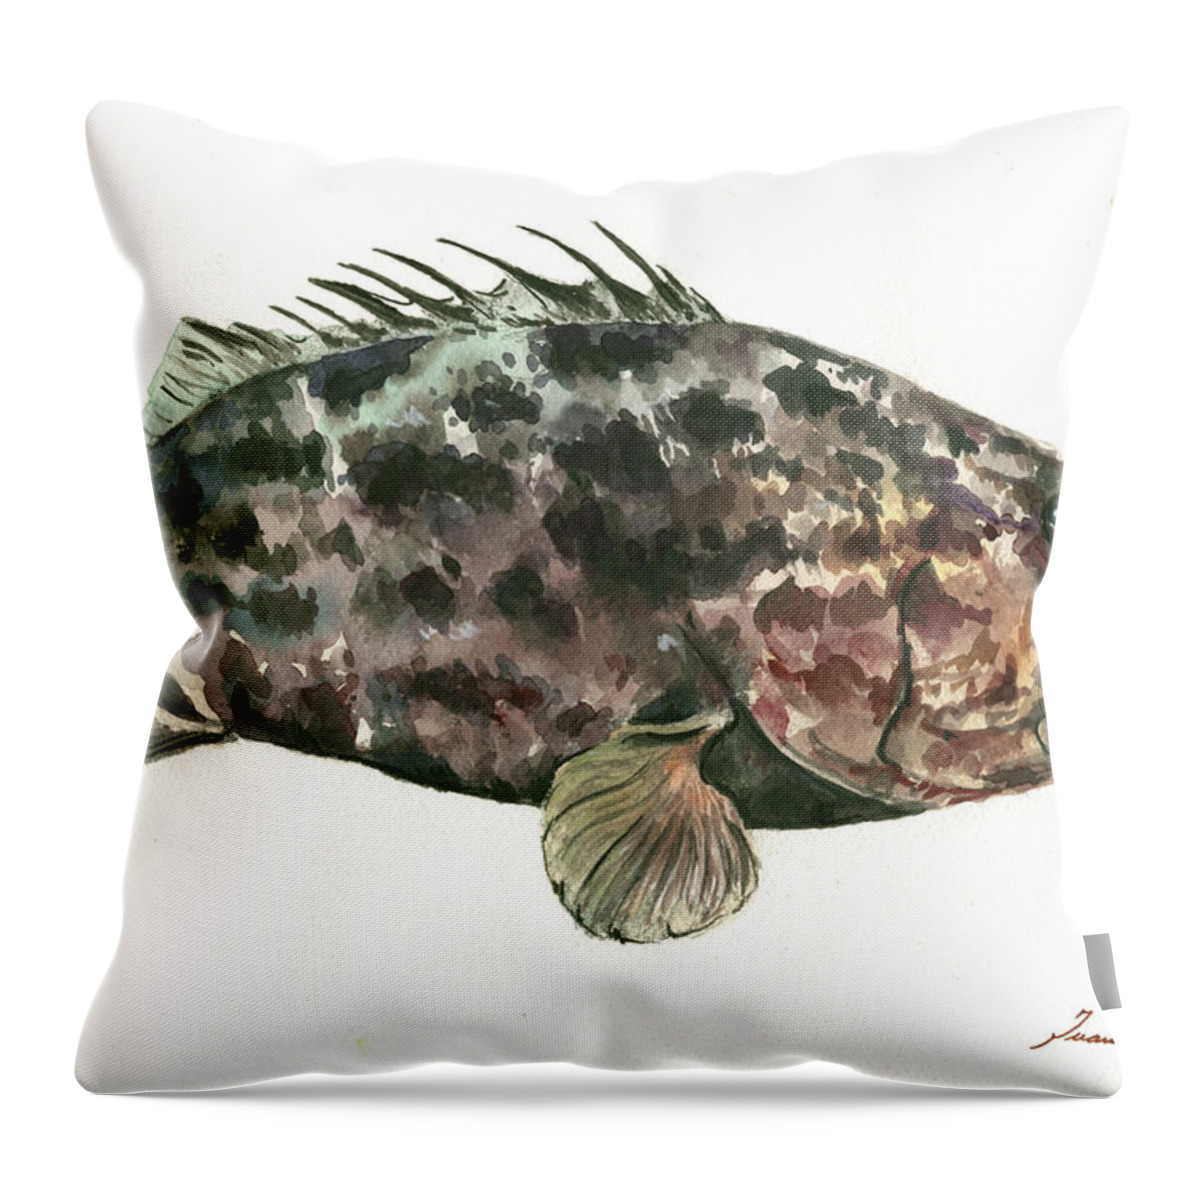 Grouper Fish Throw Pillow featuring the painting Grouper Fish by Juan Bosco